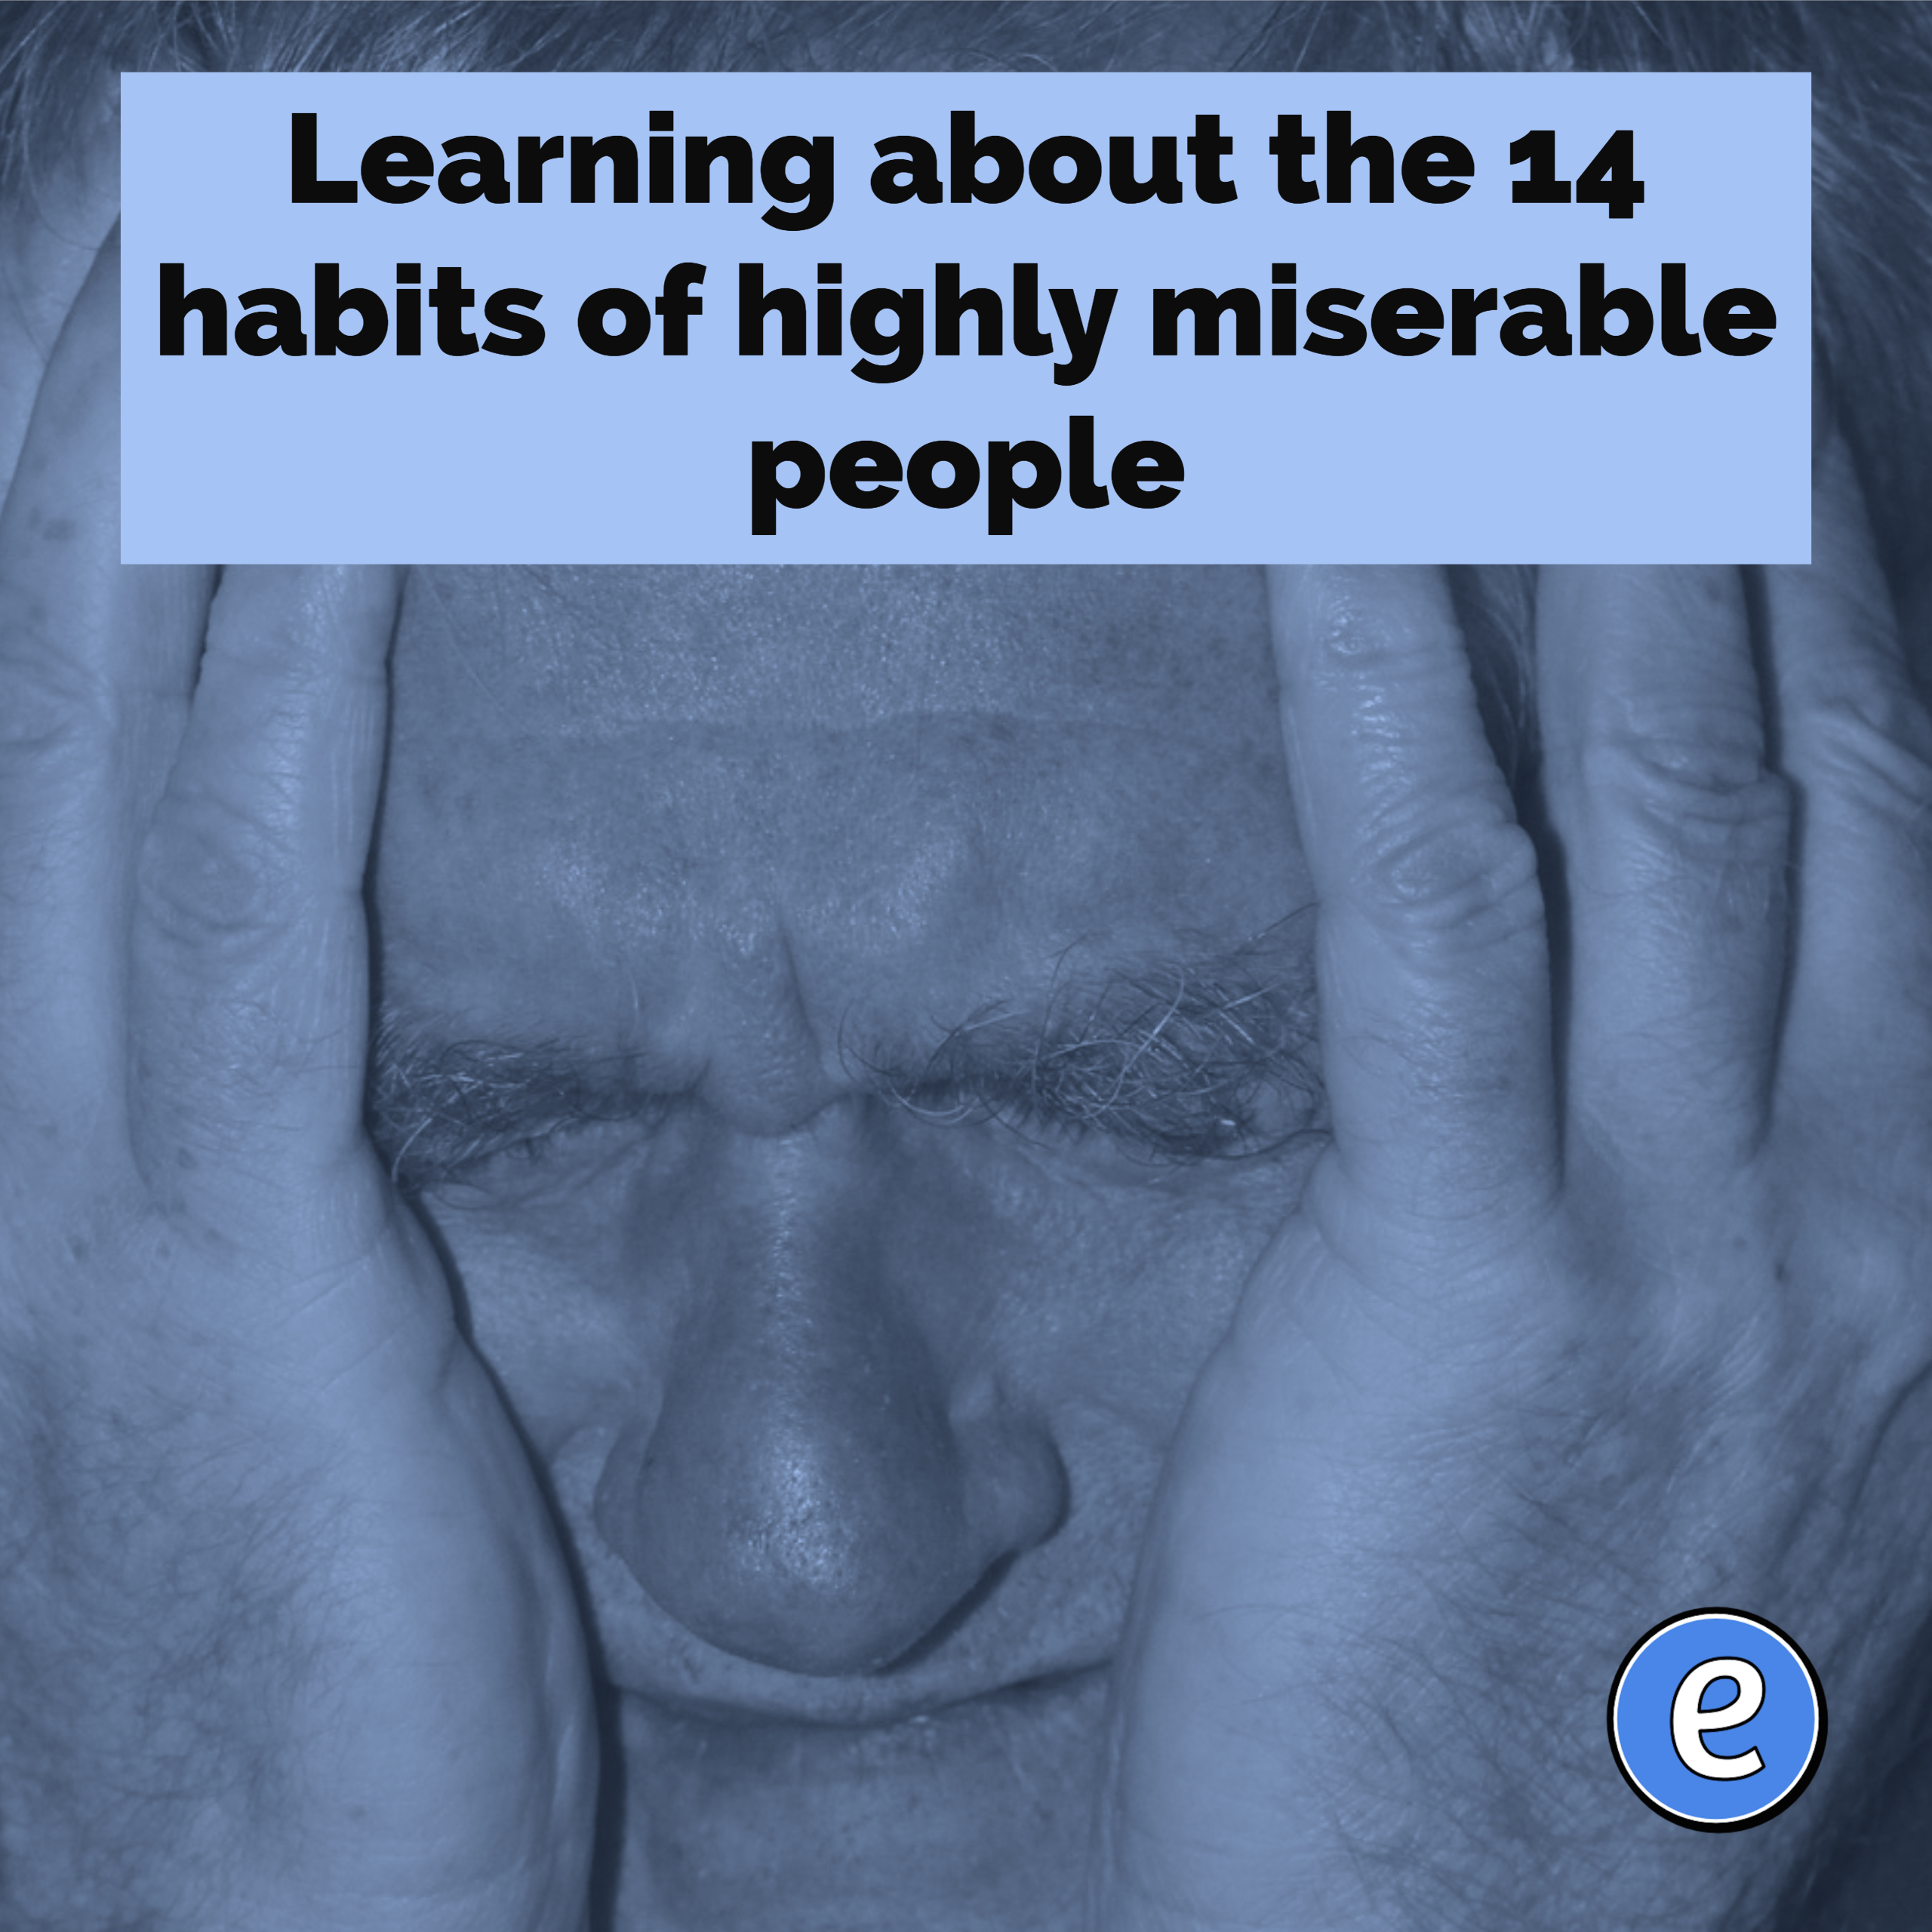 Learning about the 14 habits of highly miserable people